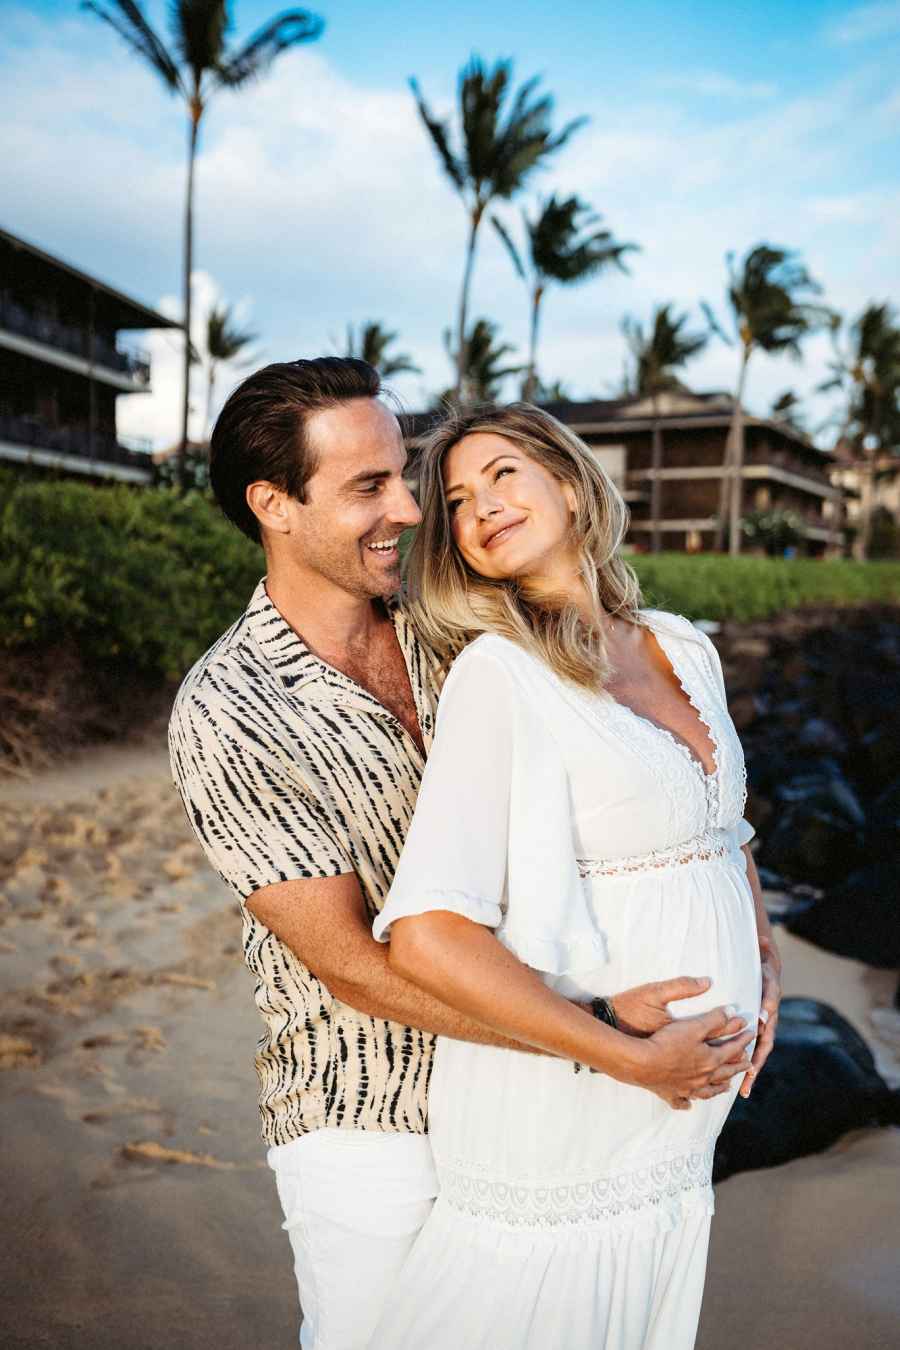 Southern Charm Ashley Jacobs Is Pregnant With 1st Child Married Mike Appel